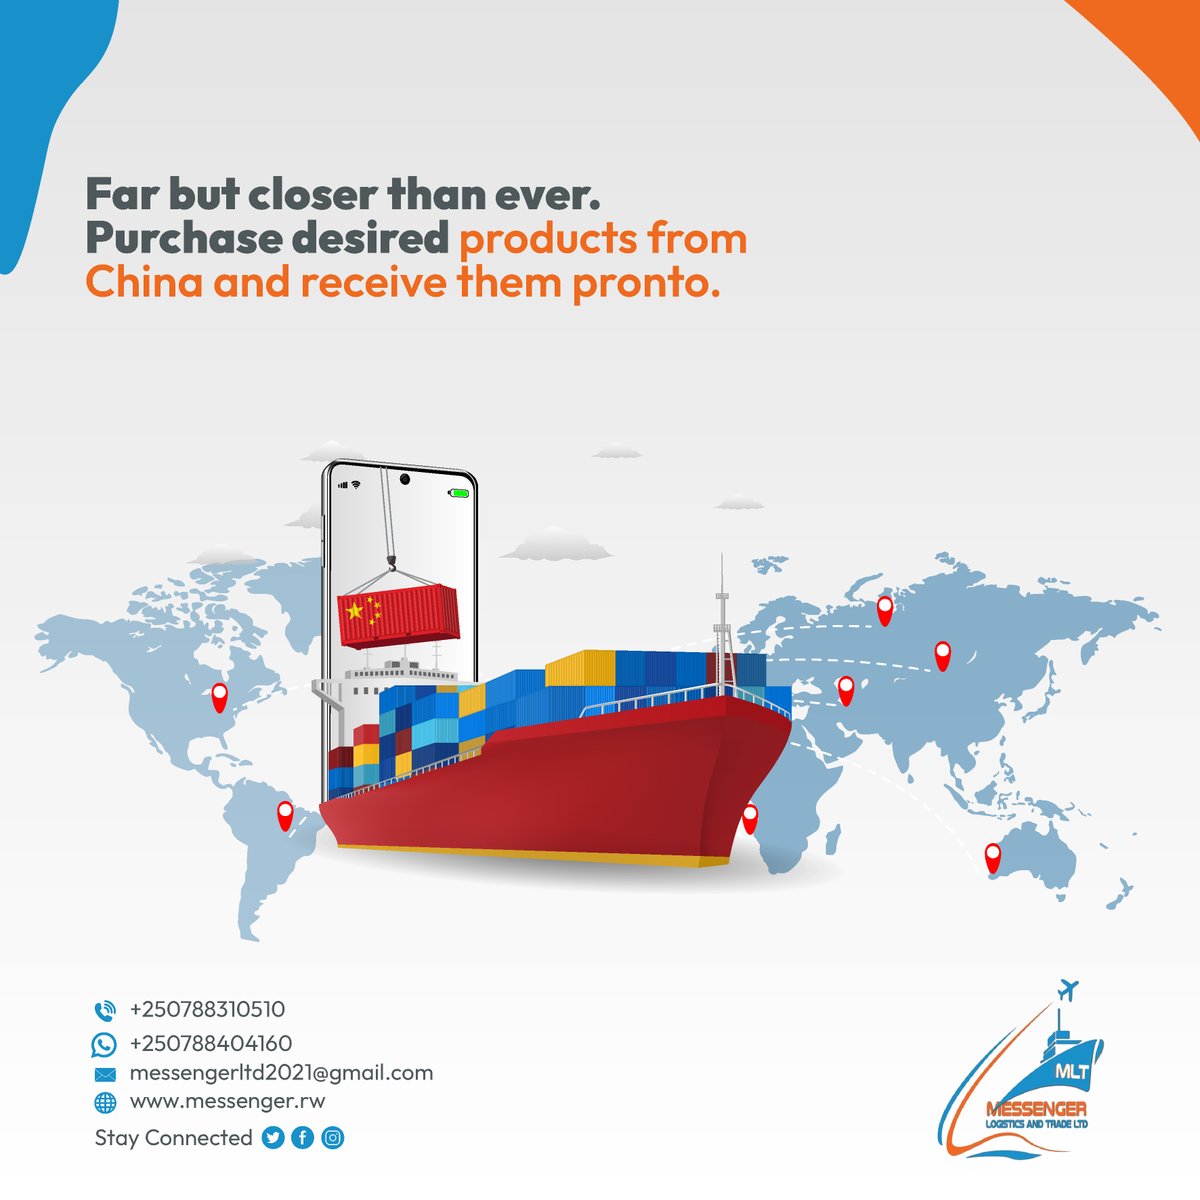 With  Messenger Logistics and Trade, you can purchase commodities of your choice from any supplier based in China through our connections. We ship from Guangzhou and Yiwu to Africa.

Visit our website for more.

#MessengerLogisticsAndTrade #ChinaTouchpoints #EfficientShipping